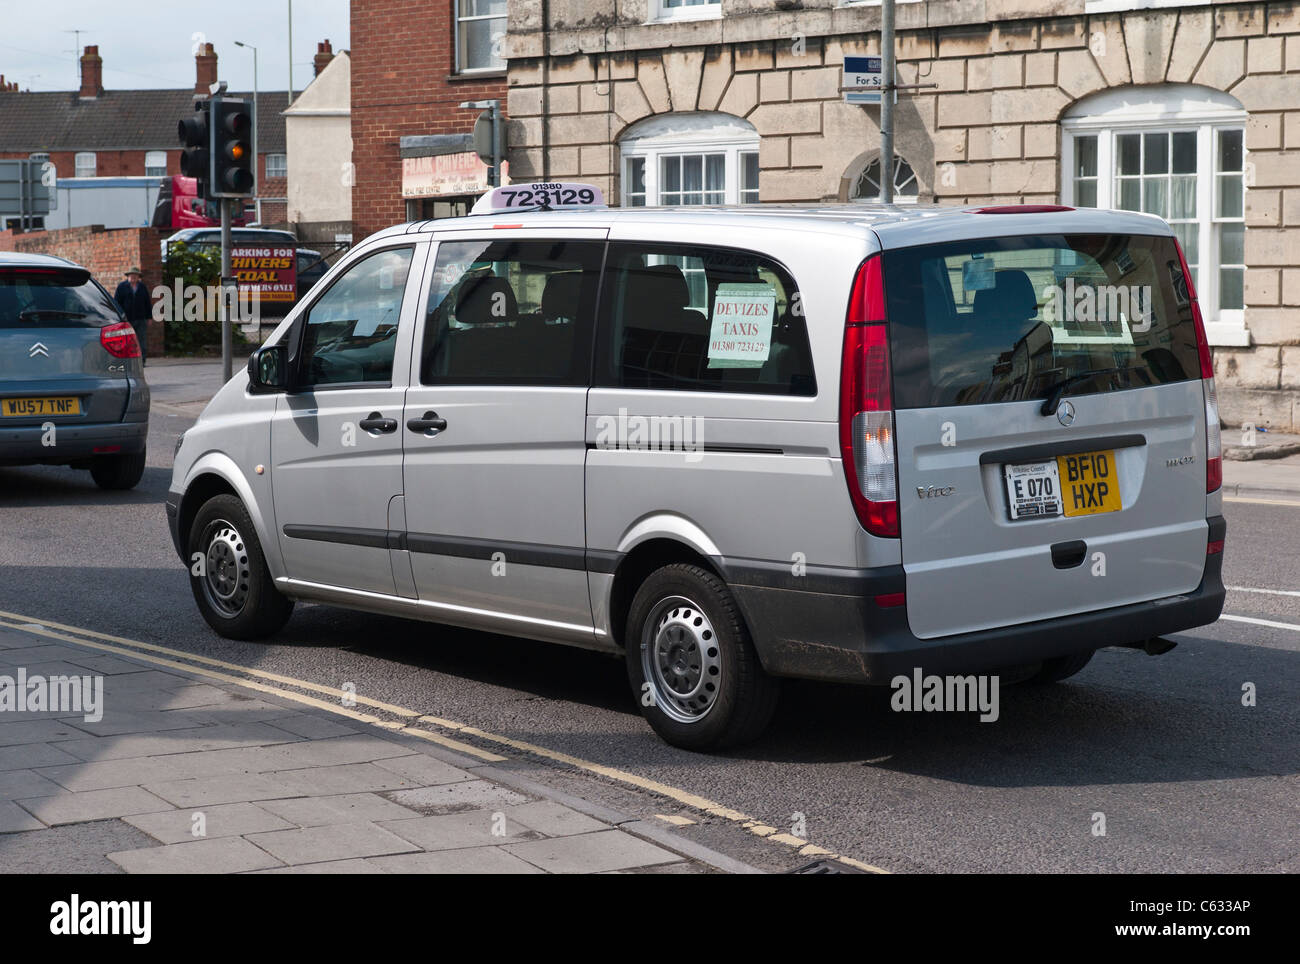 Global Vans Presents The Mercedes Vito X - Leasing a Van with